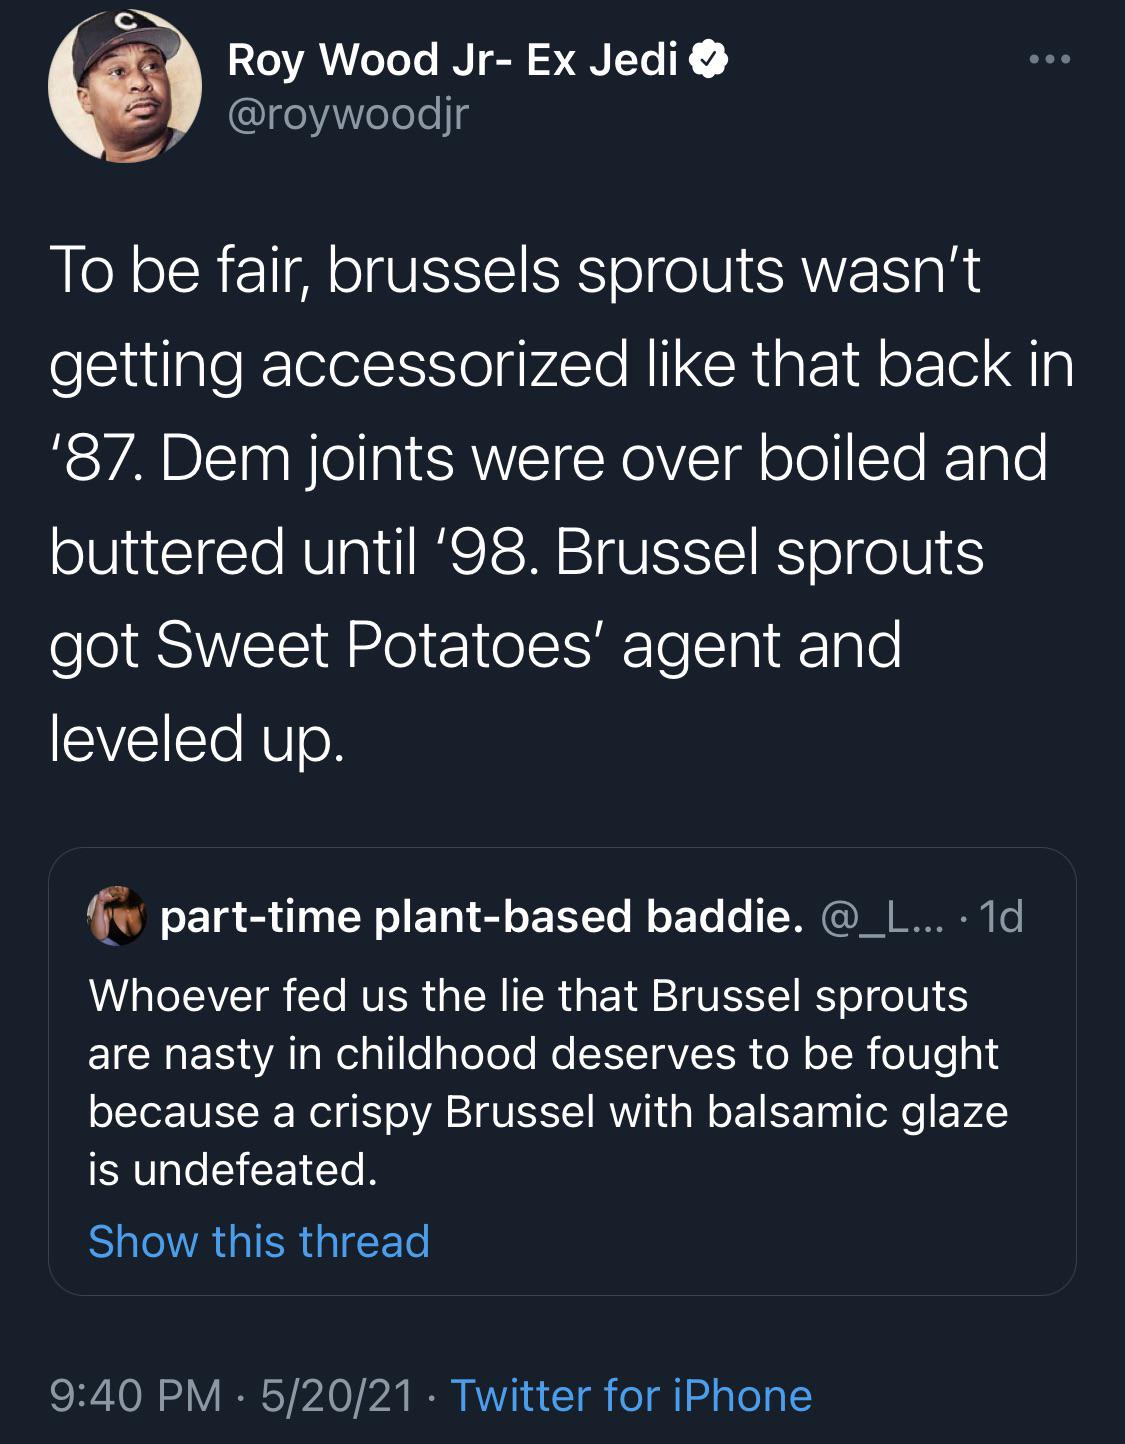 Brussels sprouts got sweet potatoes’ agent and levelled up.